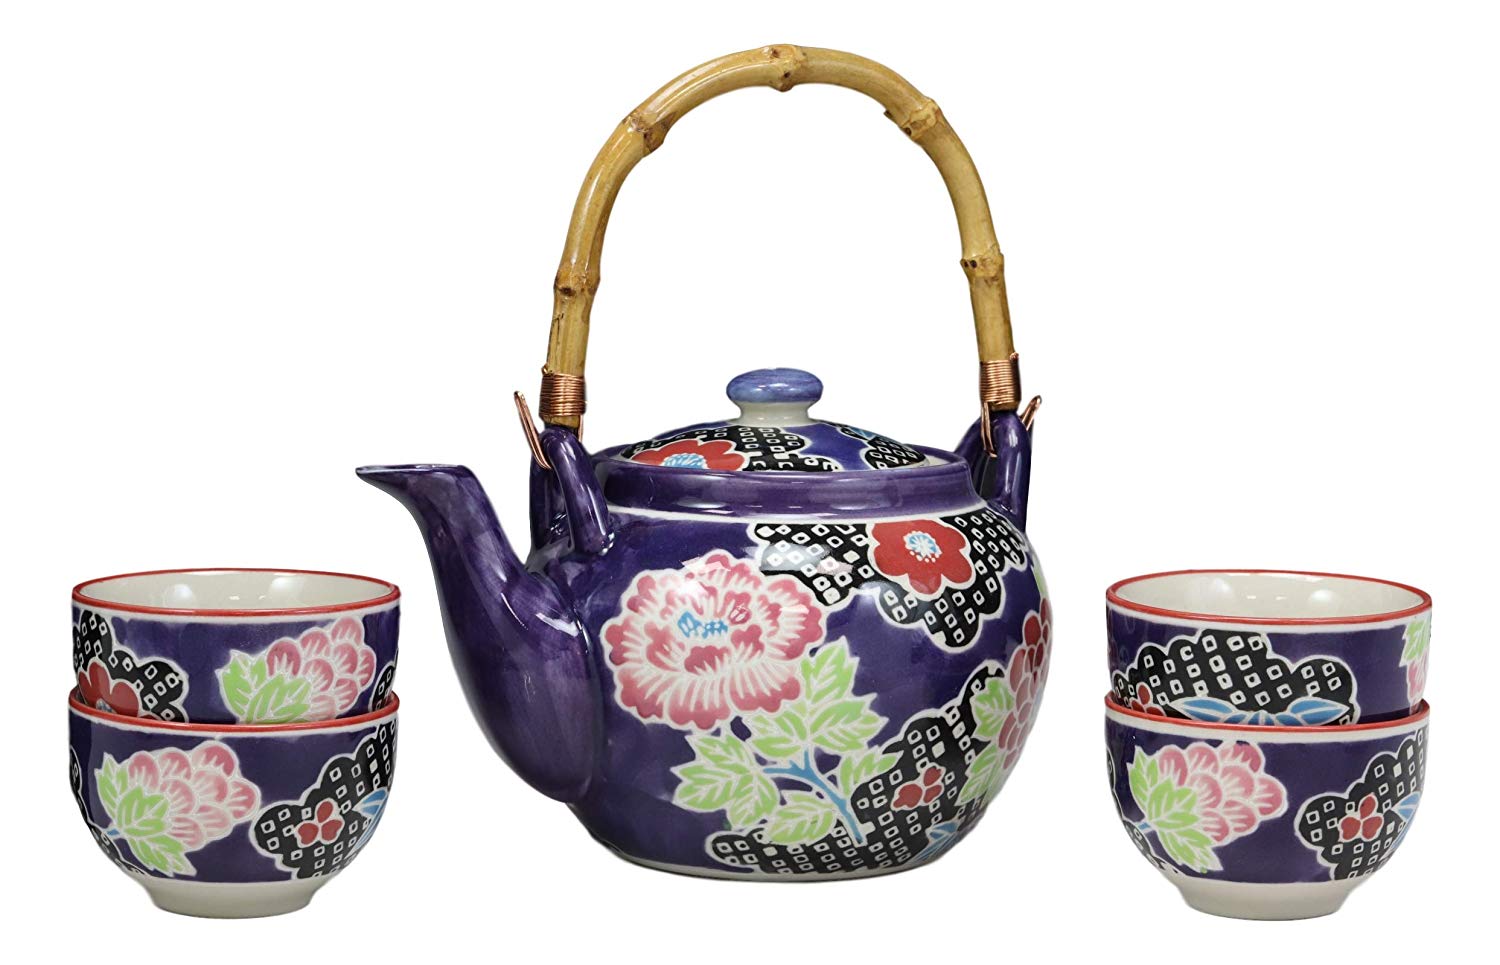 Space Purple Victorian Colorful Large Floral Blooms 25oz Tea Pot With 4 Cups Set - image 2 of 7